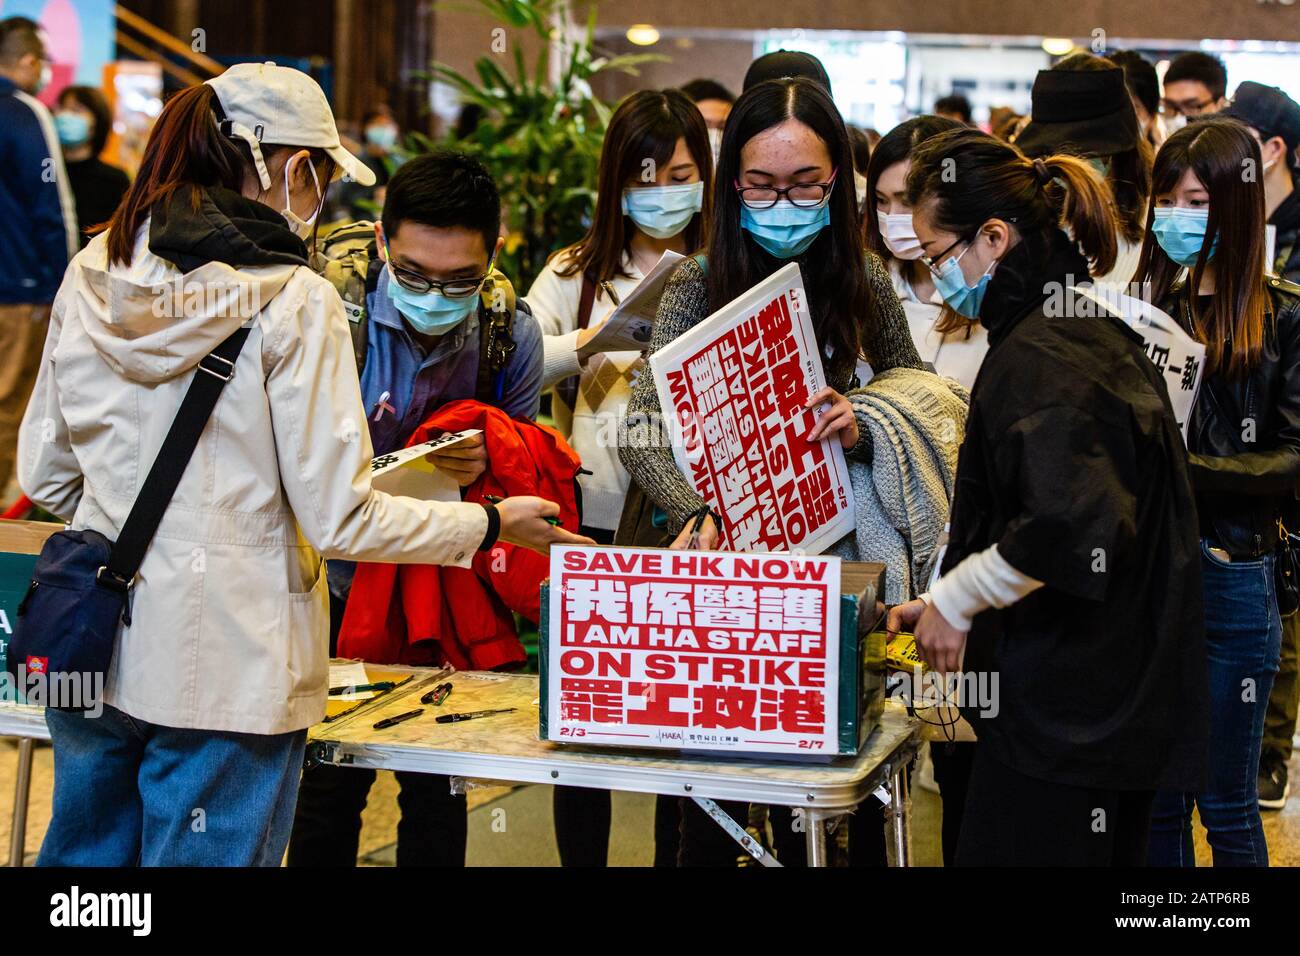 Hospital workers hand-in signed petitions during the strike in Hong Kong.Hong Kong hospital staff strike to demand closure of China border amid coronavirus fears. Stock Photo